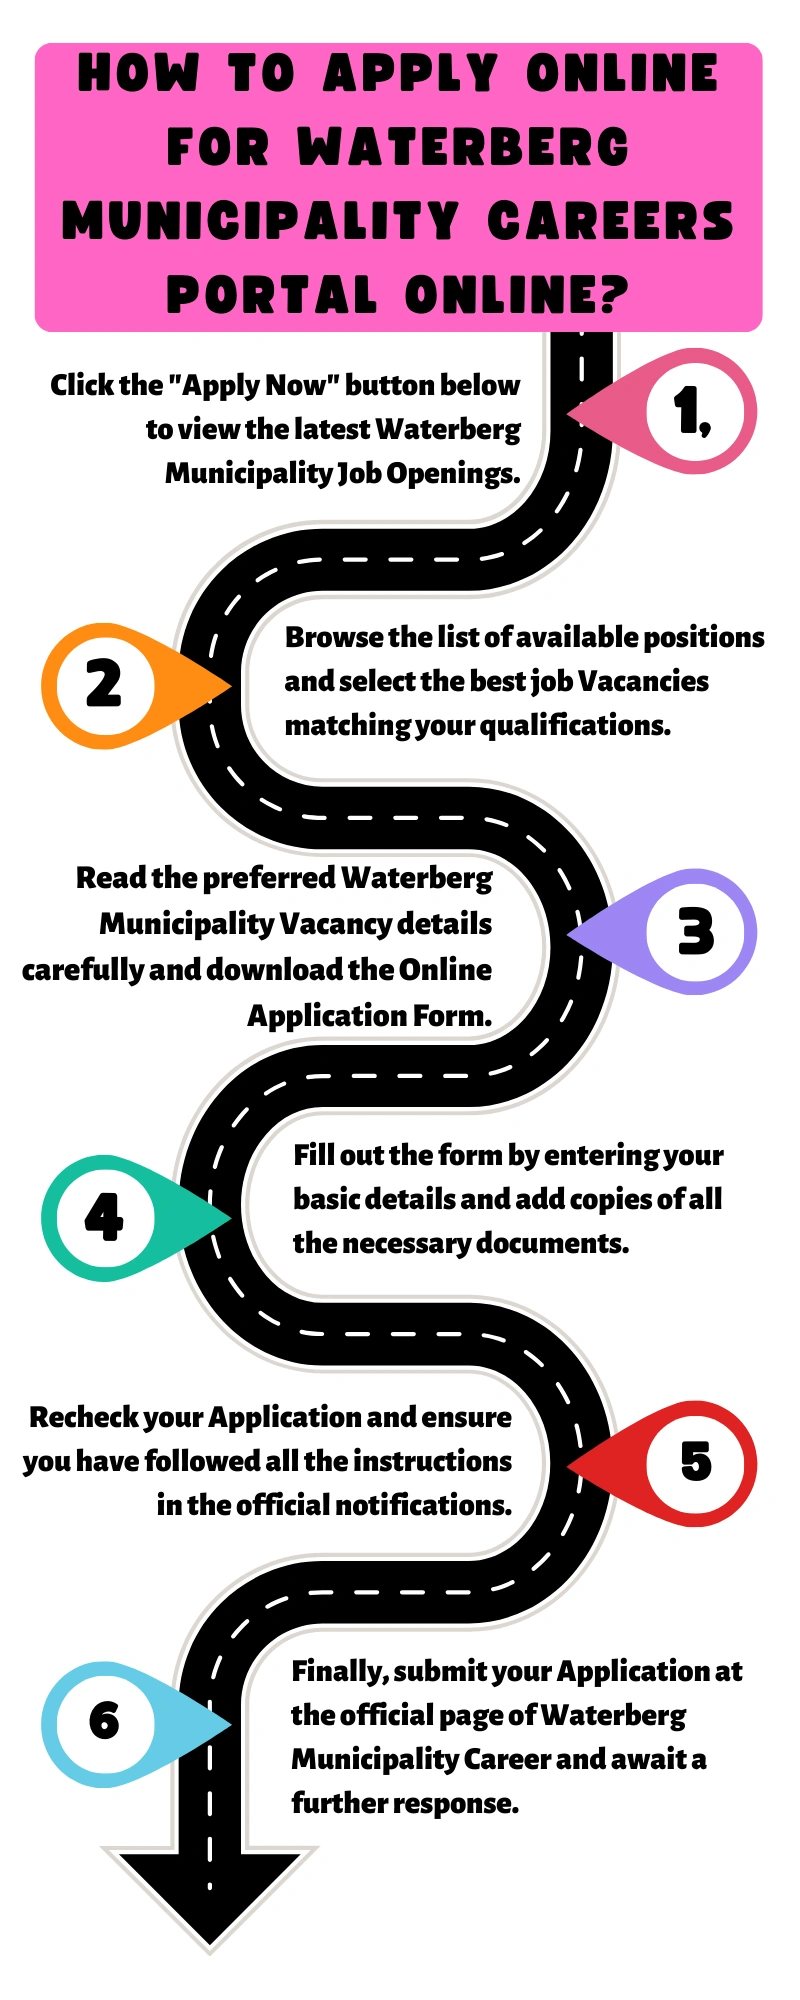 How to Apply online for Waterberg Municipality Careers Portal Online?